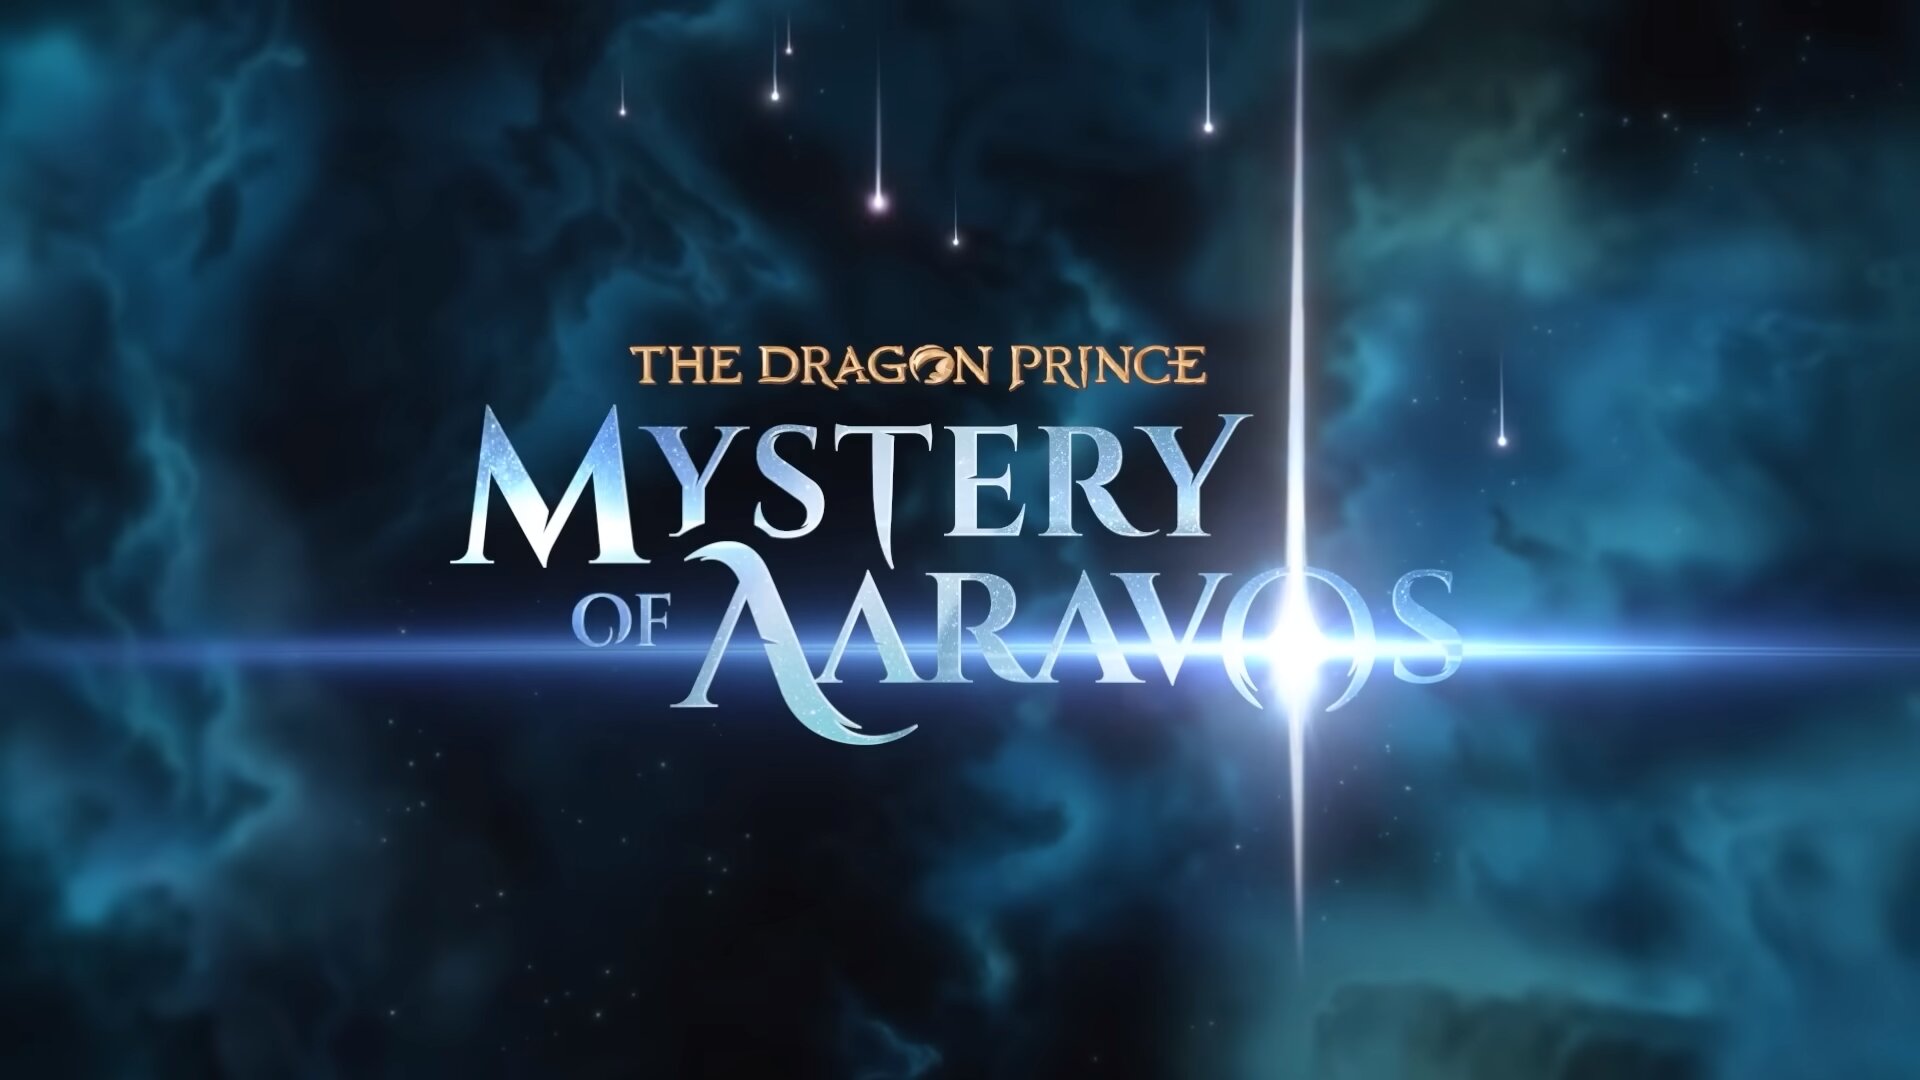 How To Watch The Dragon Prince Season 4 Episodes Online? Streaming Guide